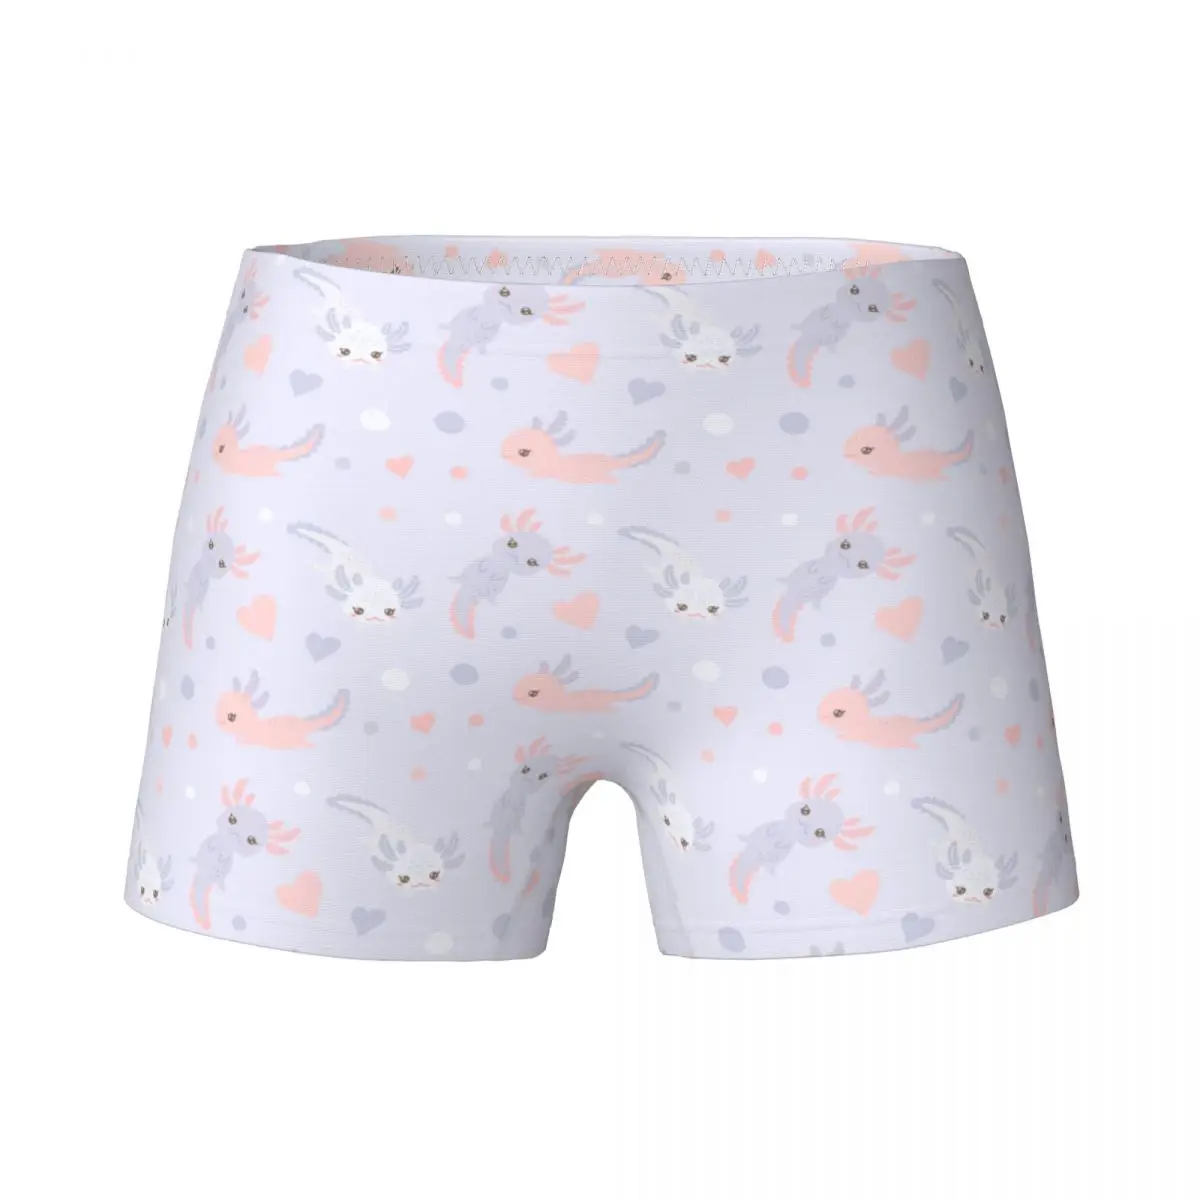 

Youth Girls Axolotl Sea Animal Boxer Children's Cotton Underwear Kids Teenagers Pink Underpants Soft Briefs For 4-15Y